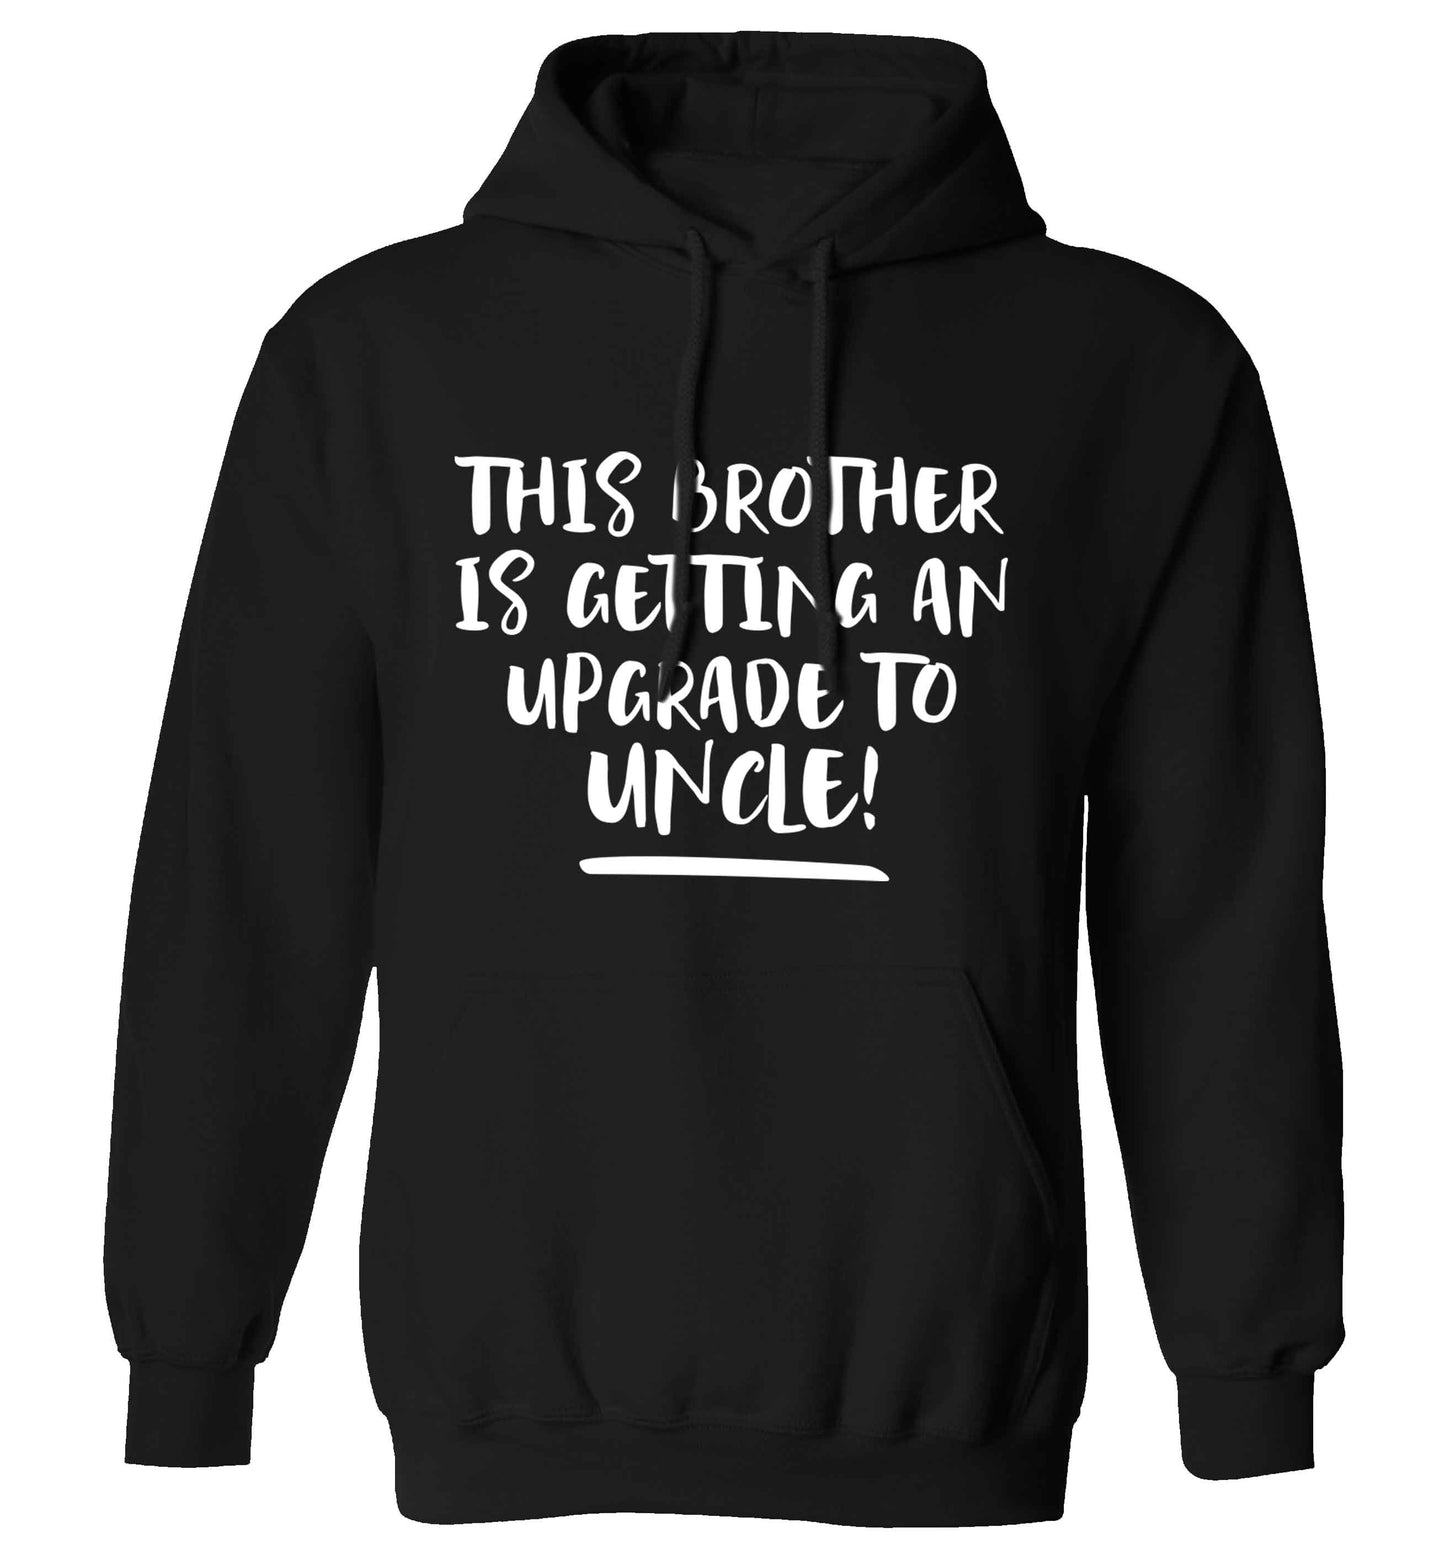 This brother is getting an upgrade to uncle! adults unisex black hoodie 2XL